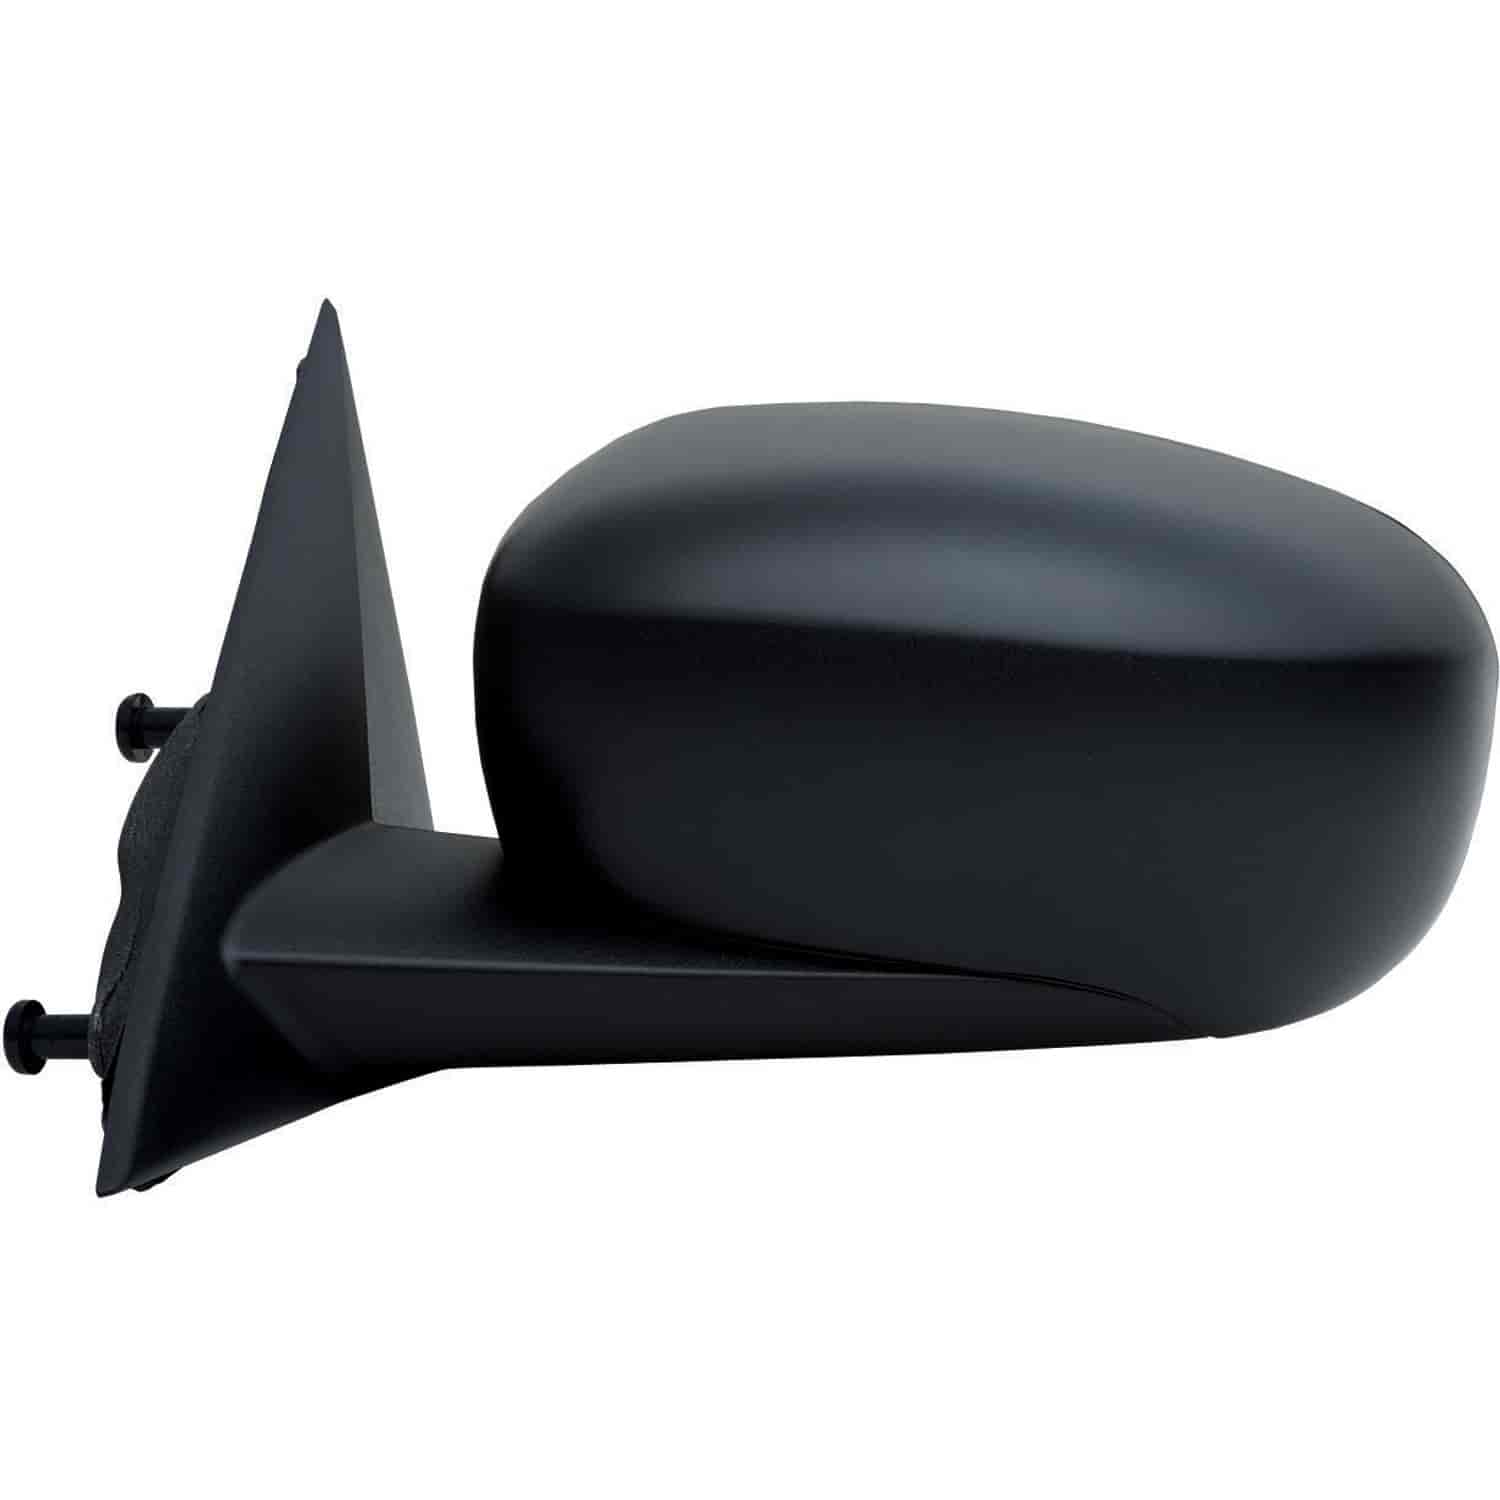 OEM Style Replacement mirror for 05 Chrysler 300 driver side mirror tested to fit and function like